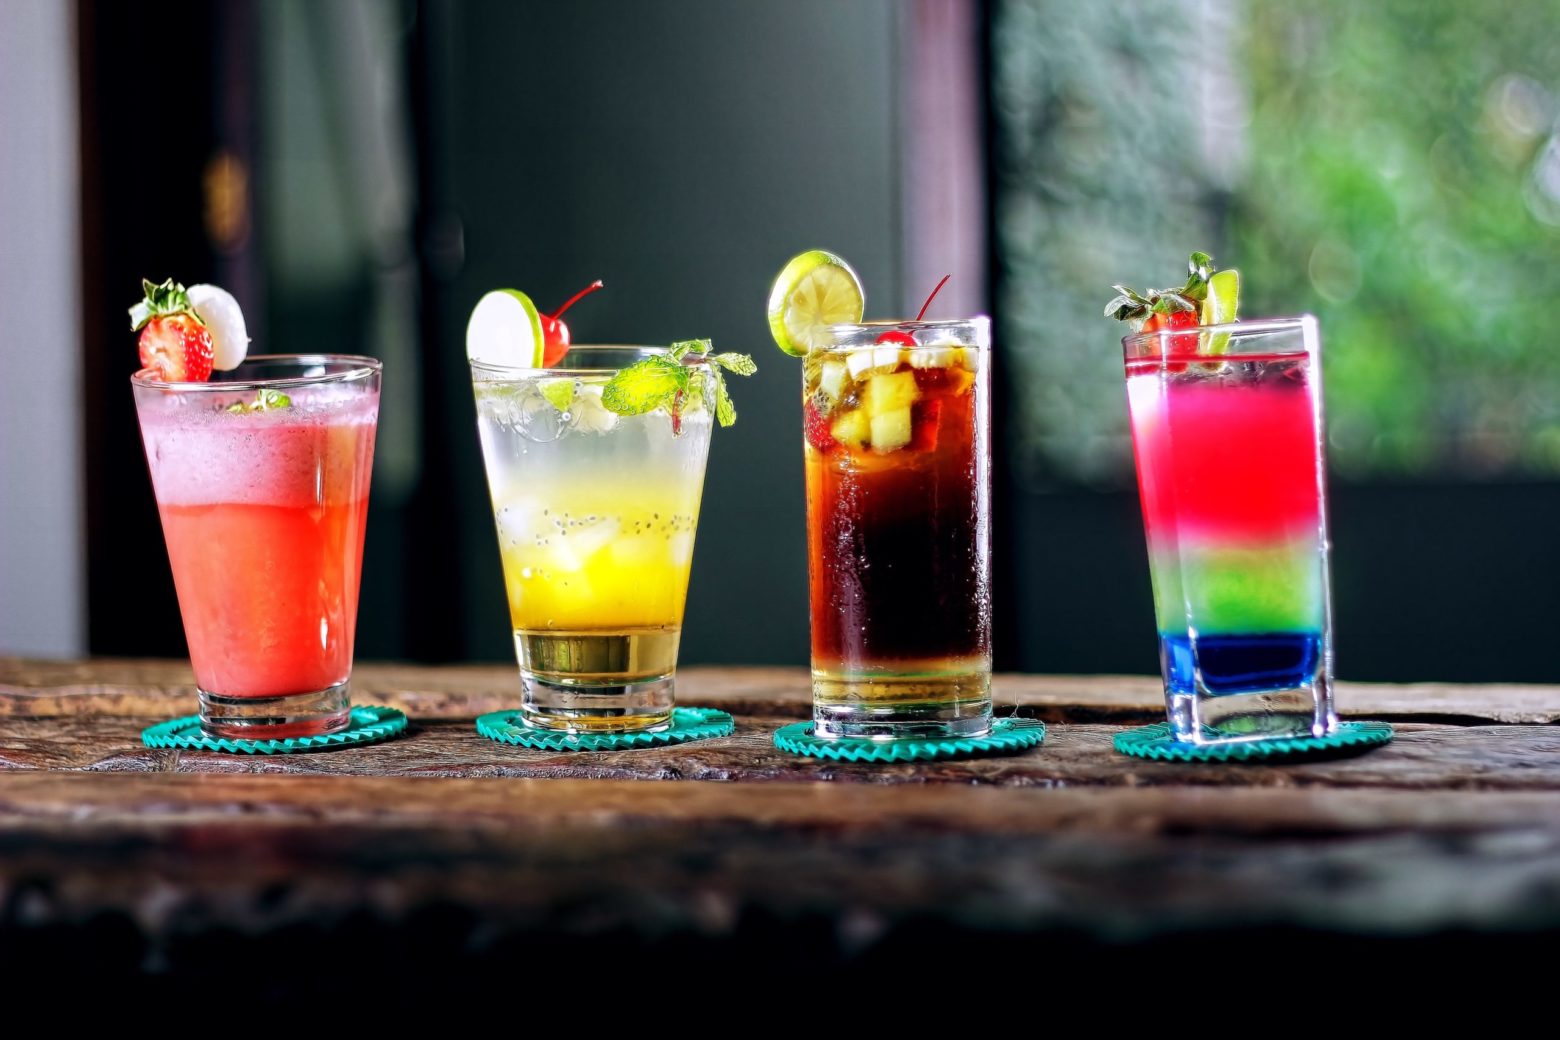 Girl's Night Out: 5 Classic Cocktails To Order Based on Your Personality